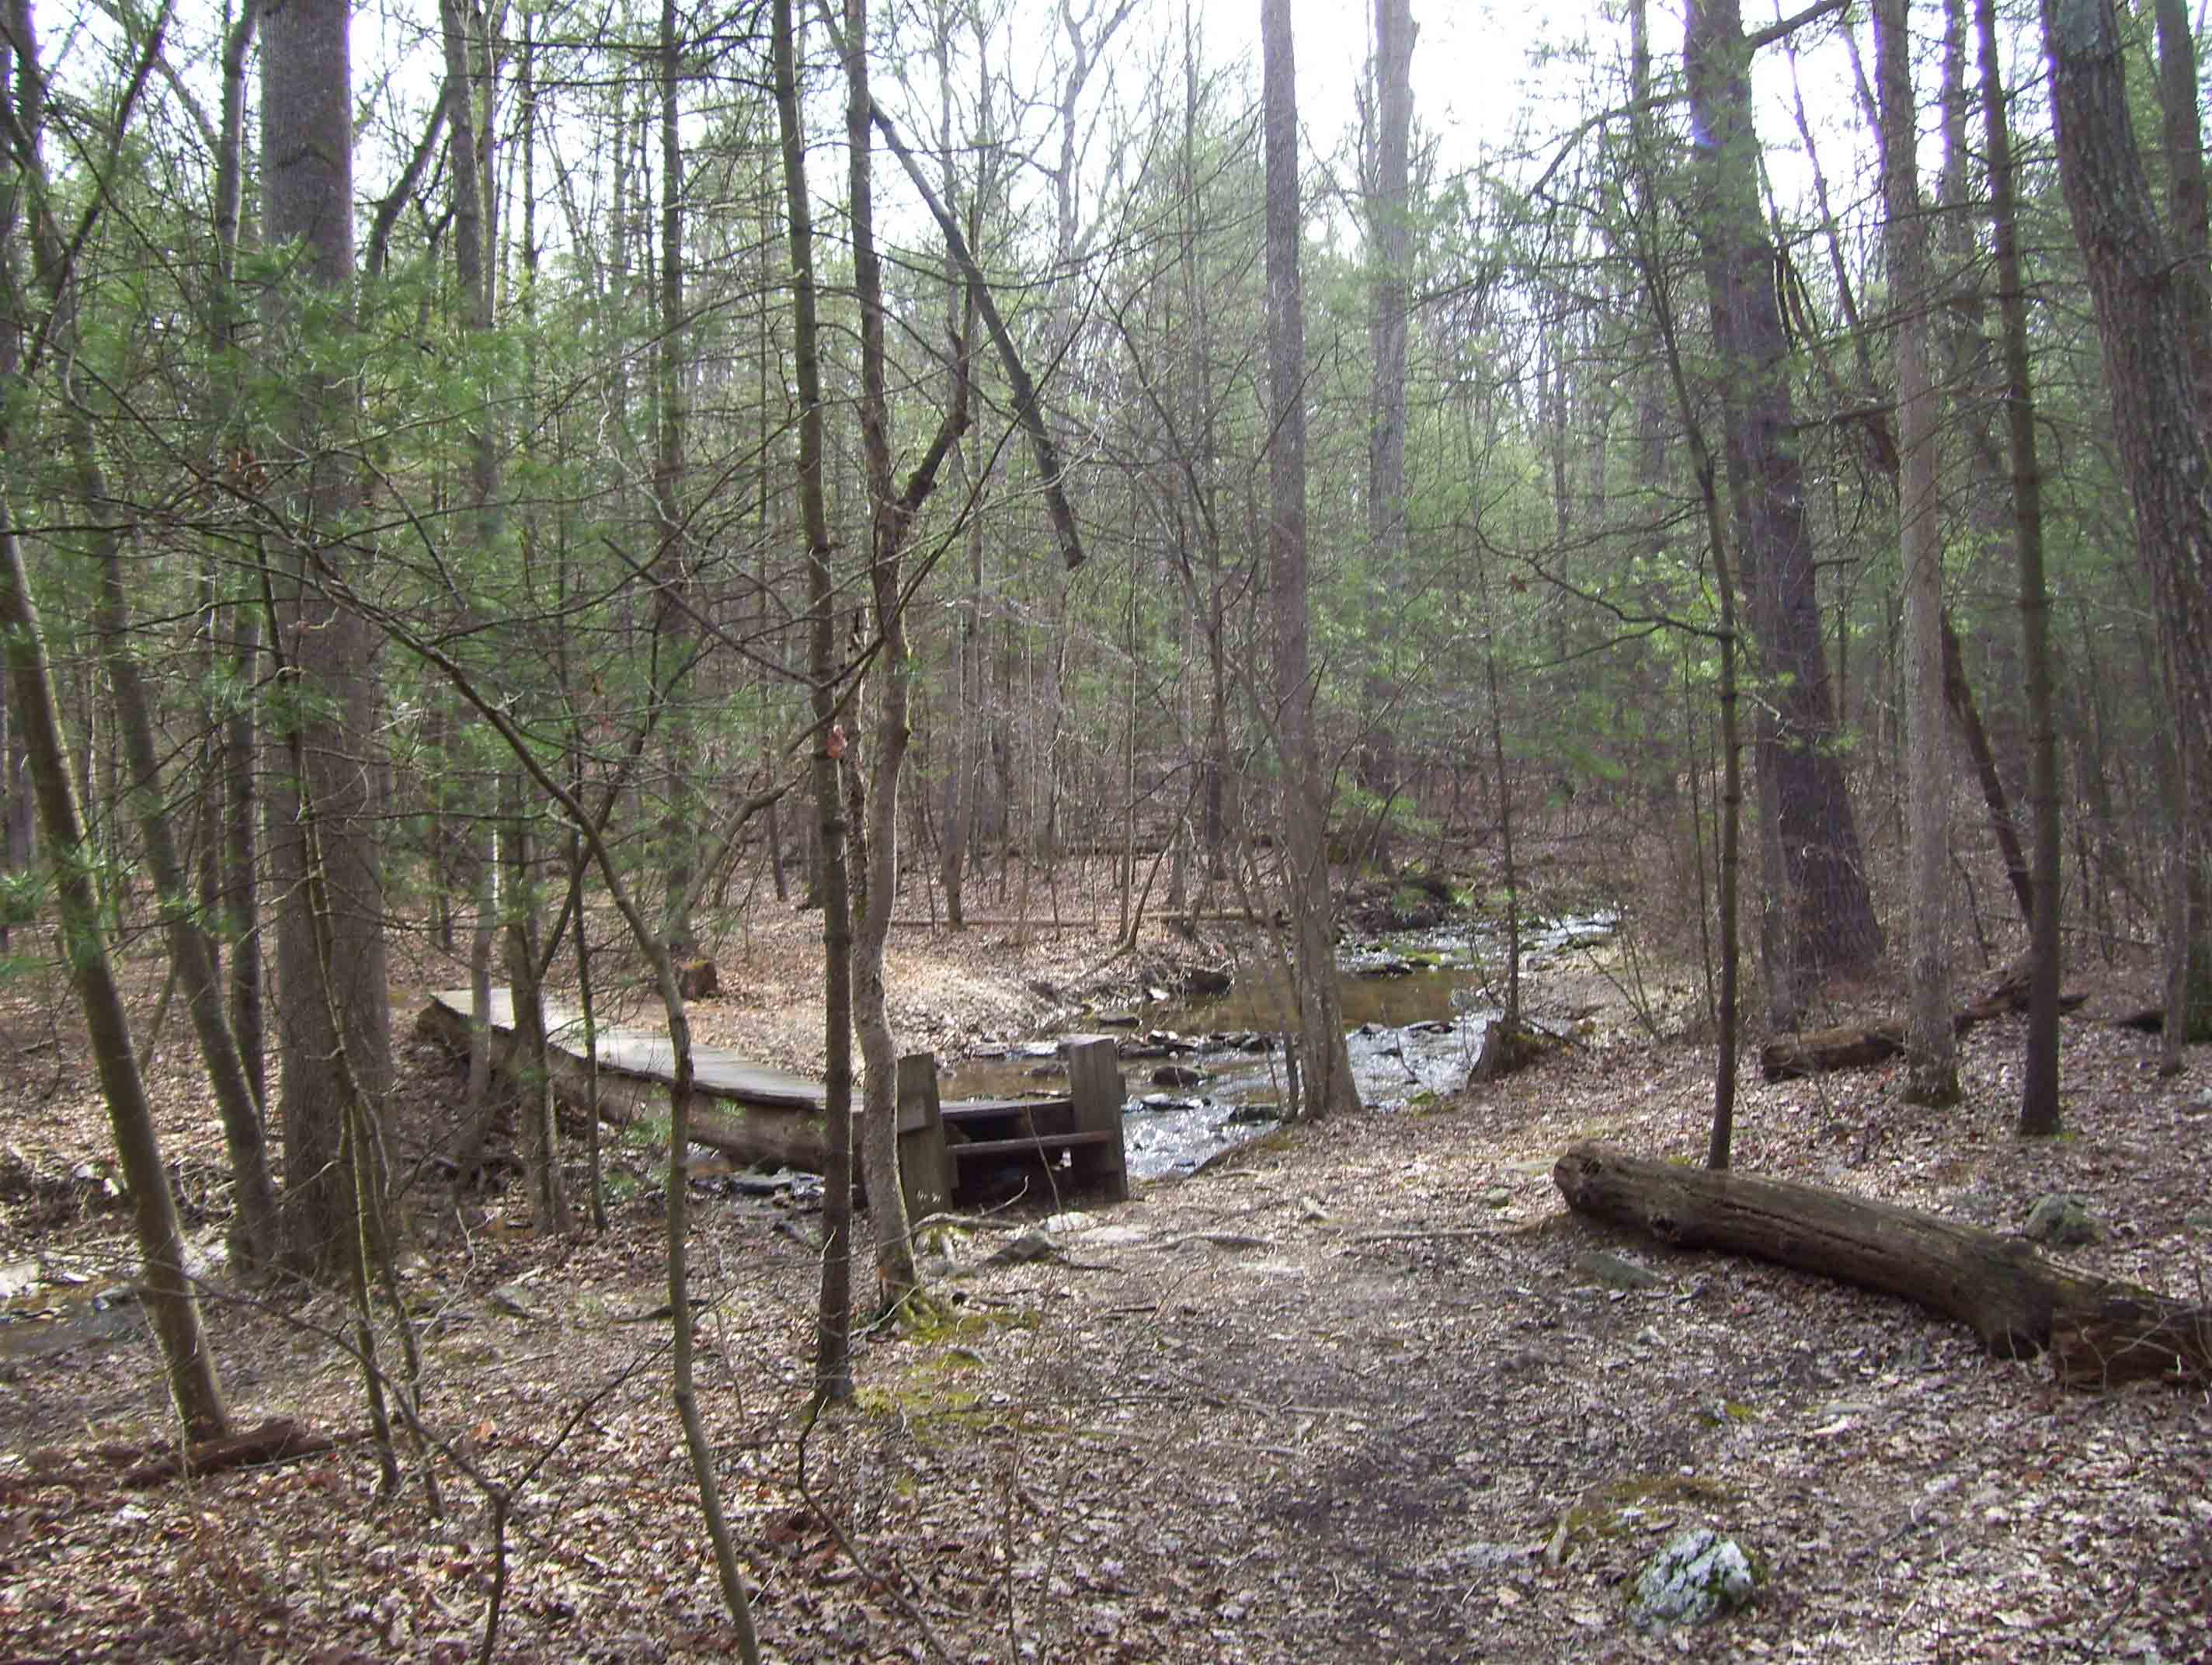 mm 3.2  Trail crossing of picturesque but polluted Tagg Run.Taken in 2008.  Courtesy dlcul@conncoll.edu